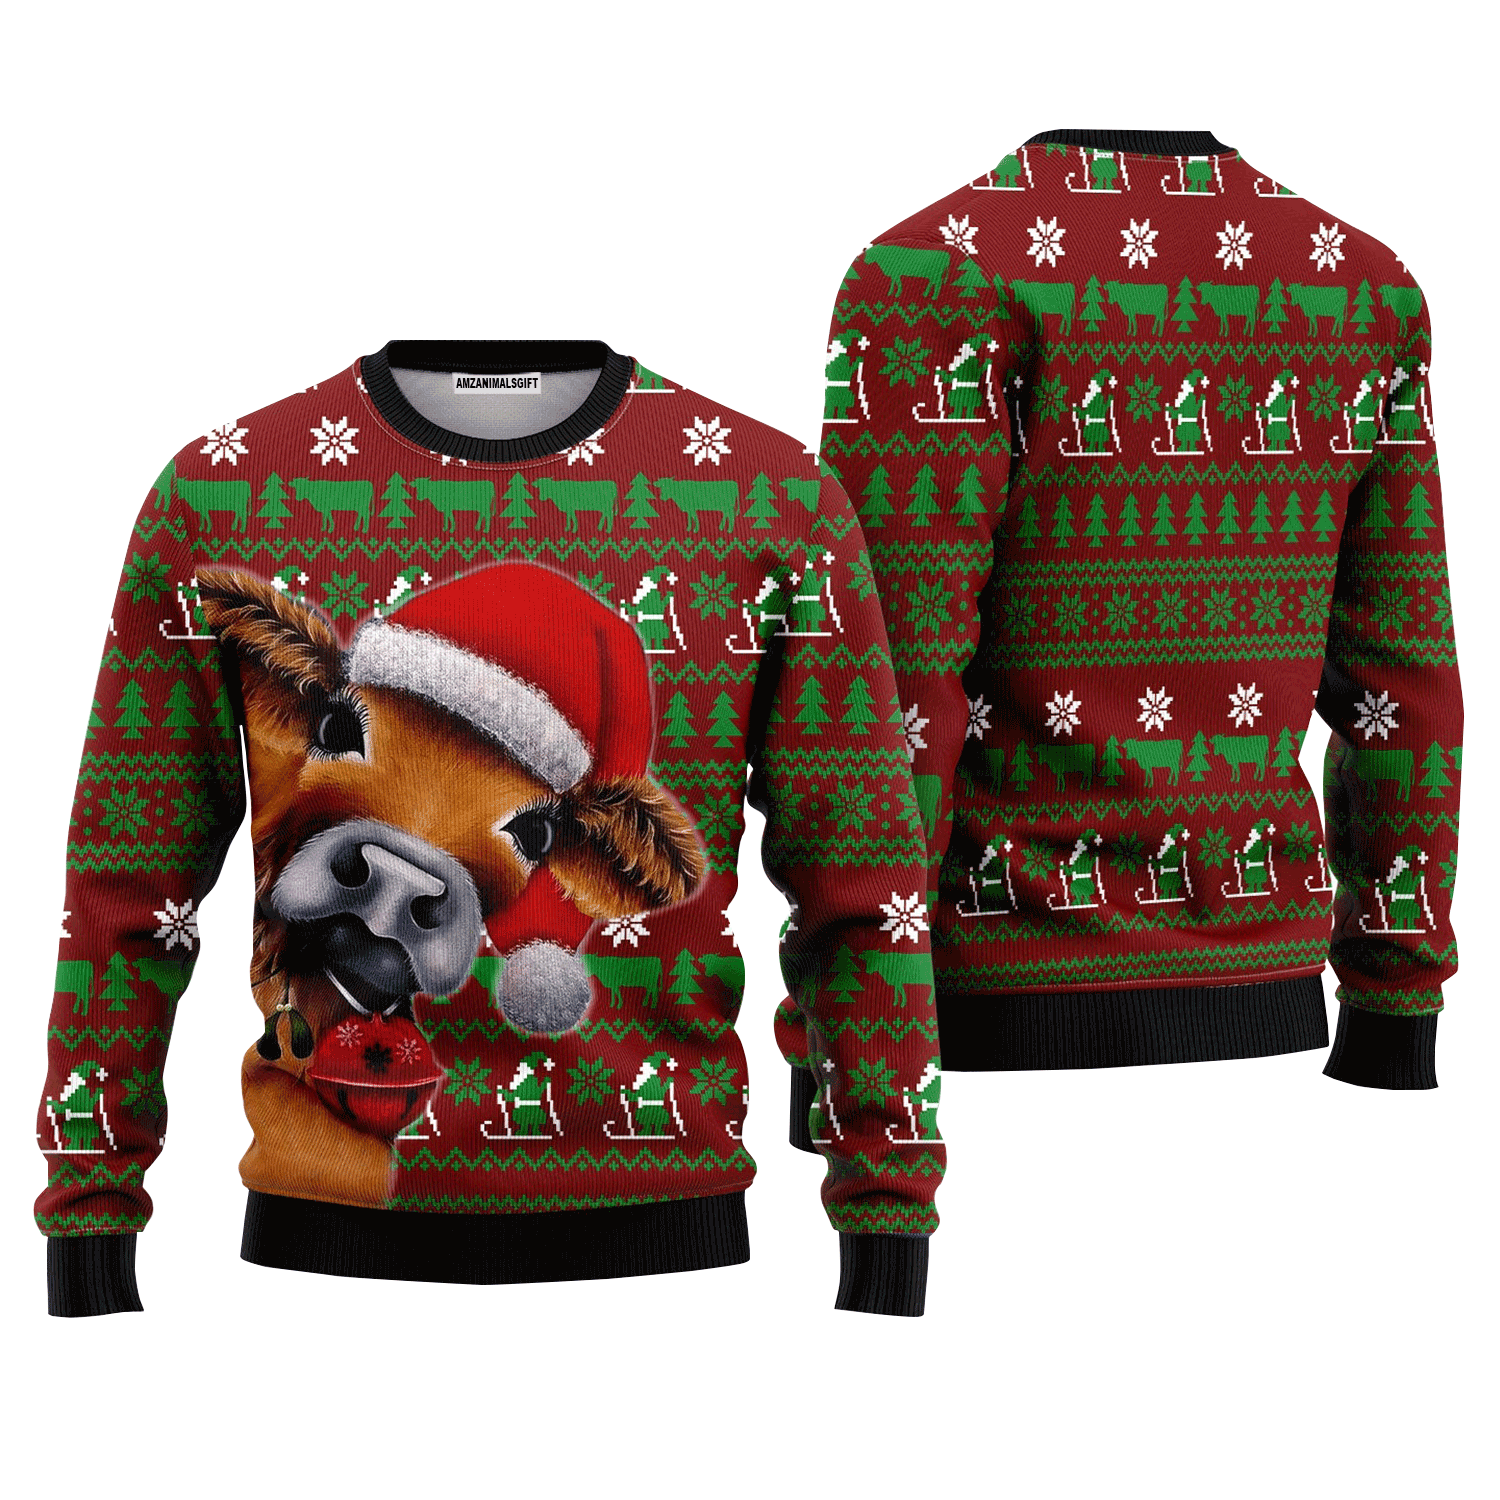 Cow Xmas Christmas Sweater, Ugly Sweater For Men & Women, Perfect Outfit For Christmas New Year Autumn Winter